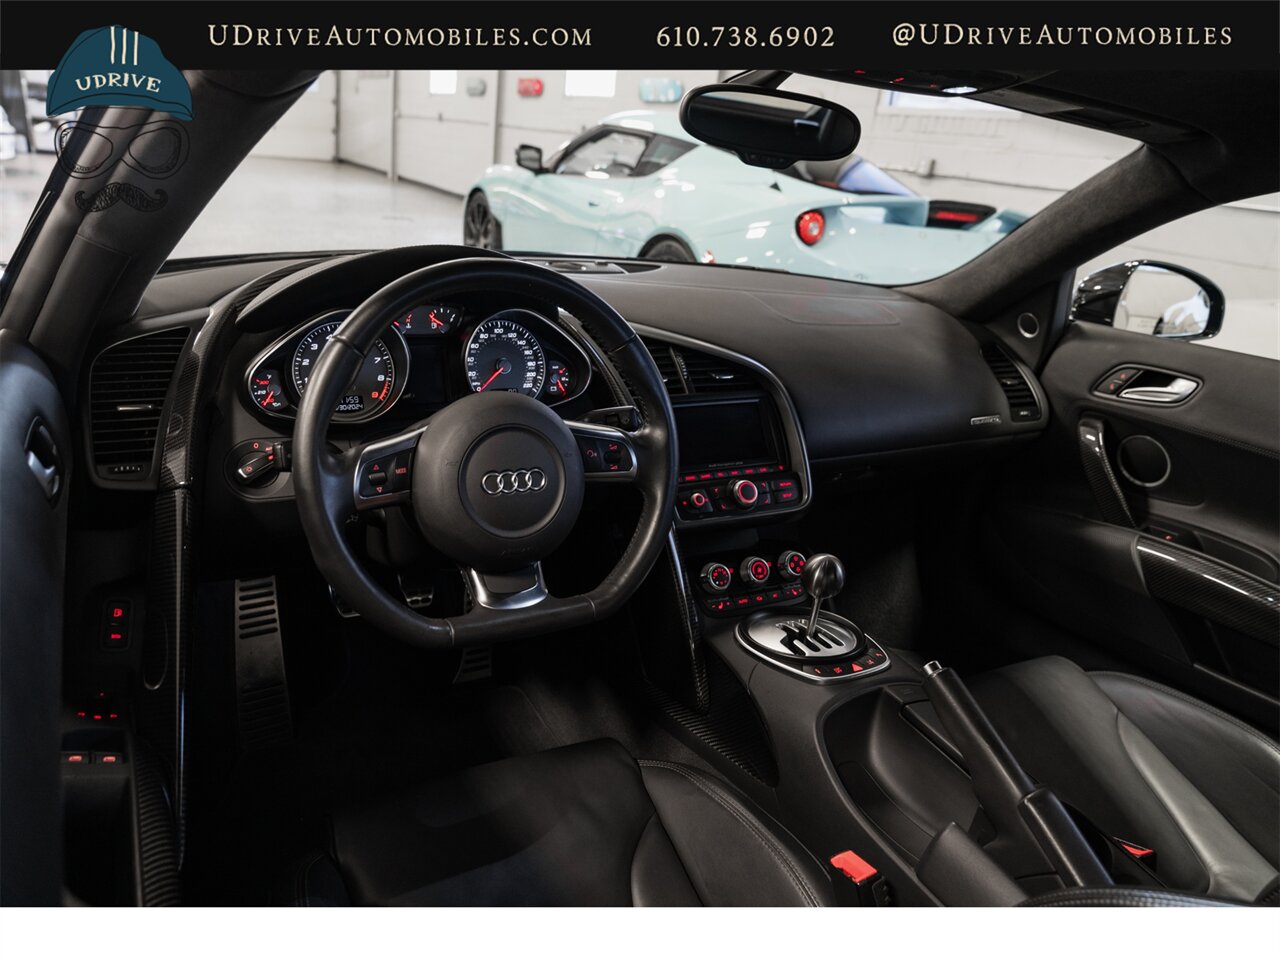 2009 Audi R8 Quattro  4.2L V8 6 Speed Manual - Photo 5 - West Chester, PA 19382